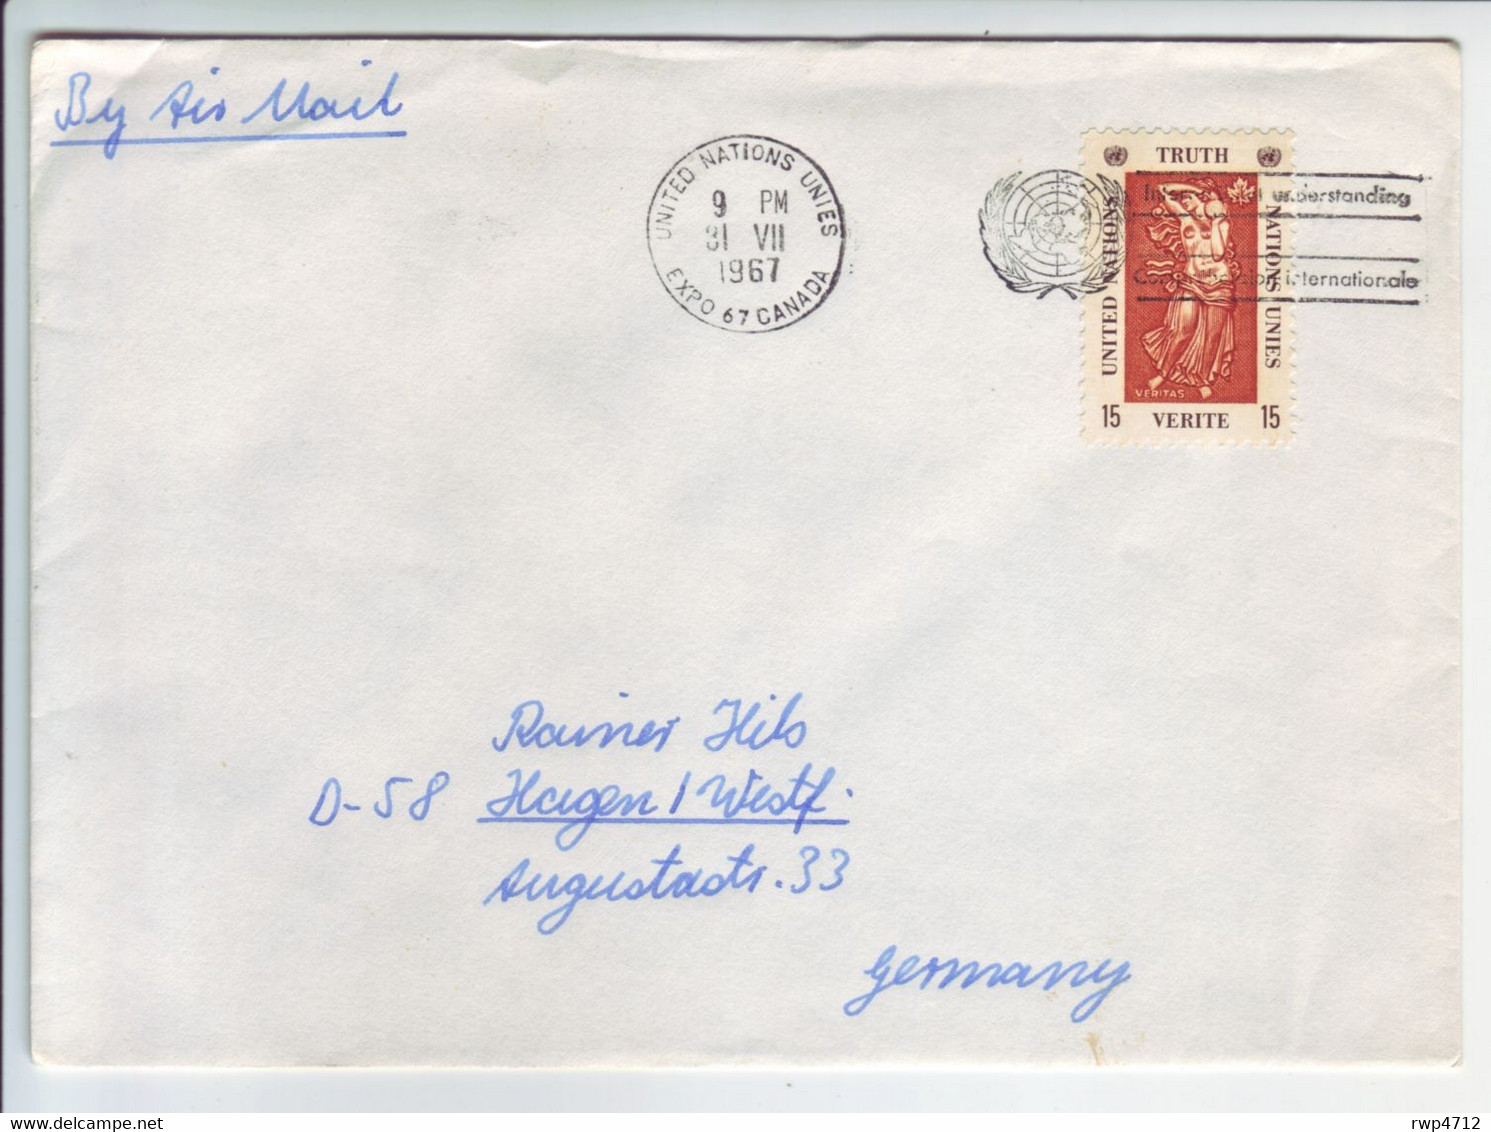 UNO Luftpostbrief  Airmail Cover  Lettre  EXPO 67 CANADA To Germany - Lettres & Documents